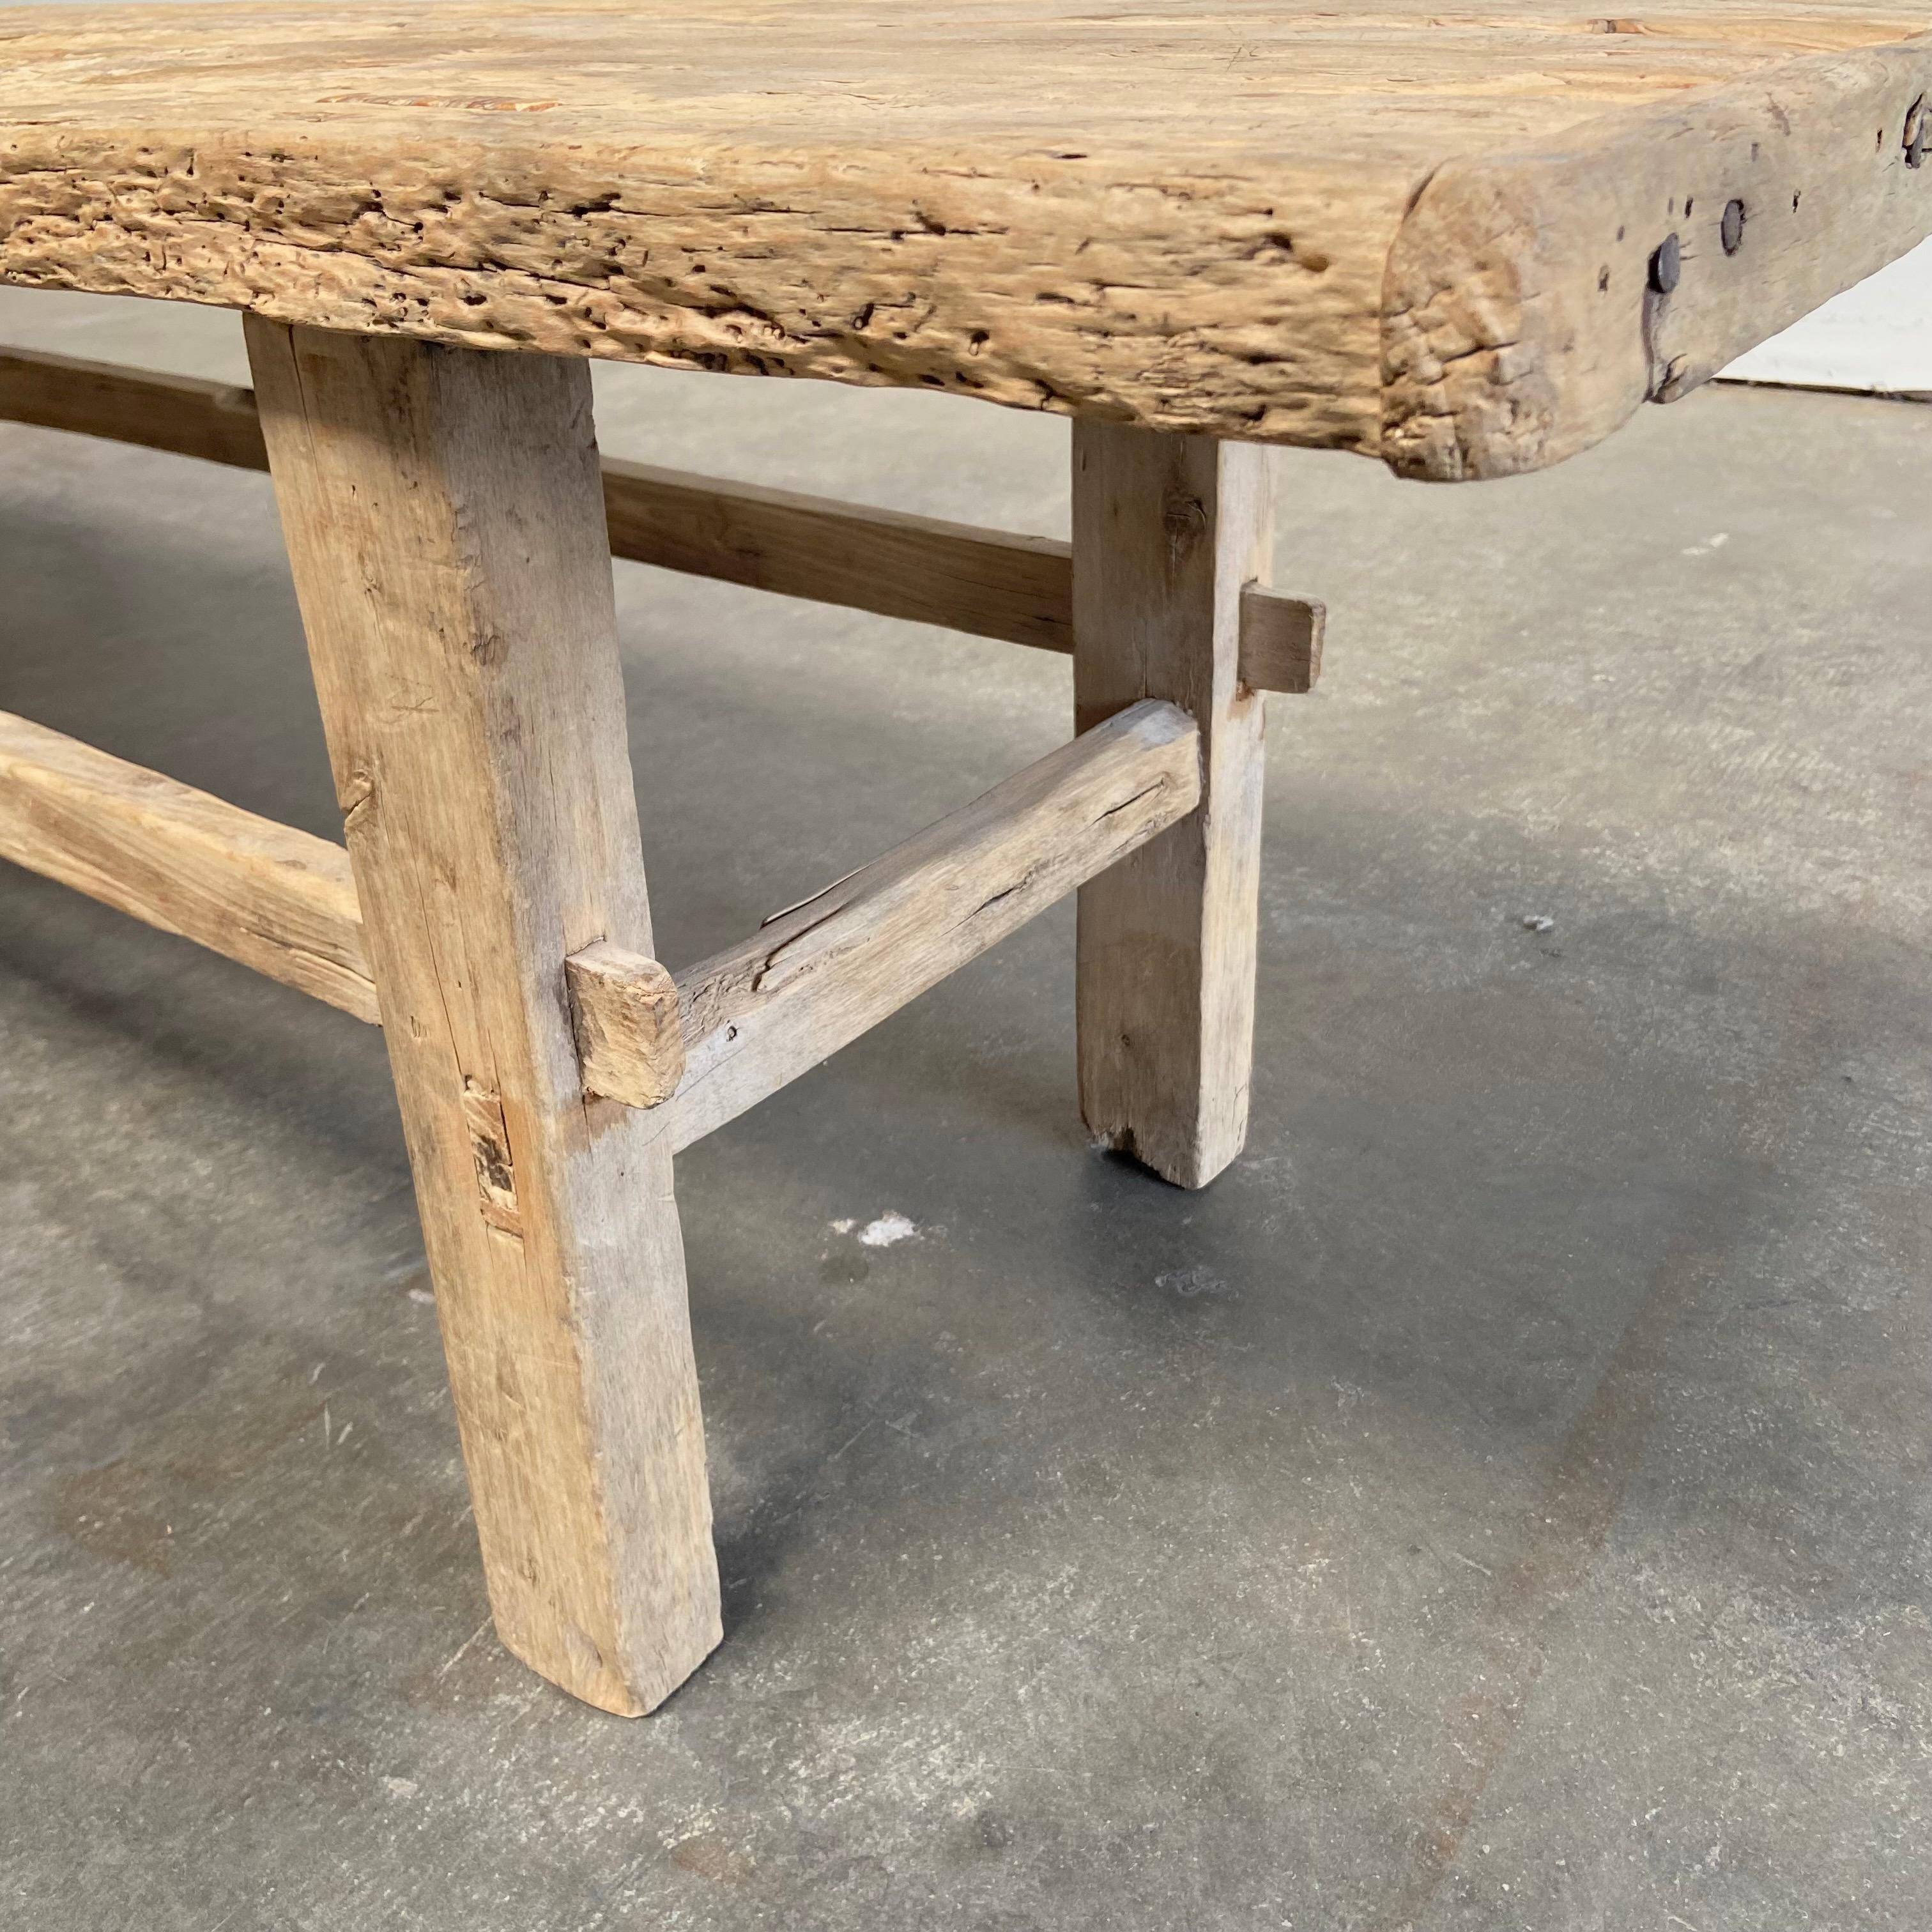 19th Century Vintage Elm Wood Coffee Table Wide Seat Bench